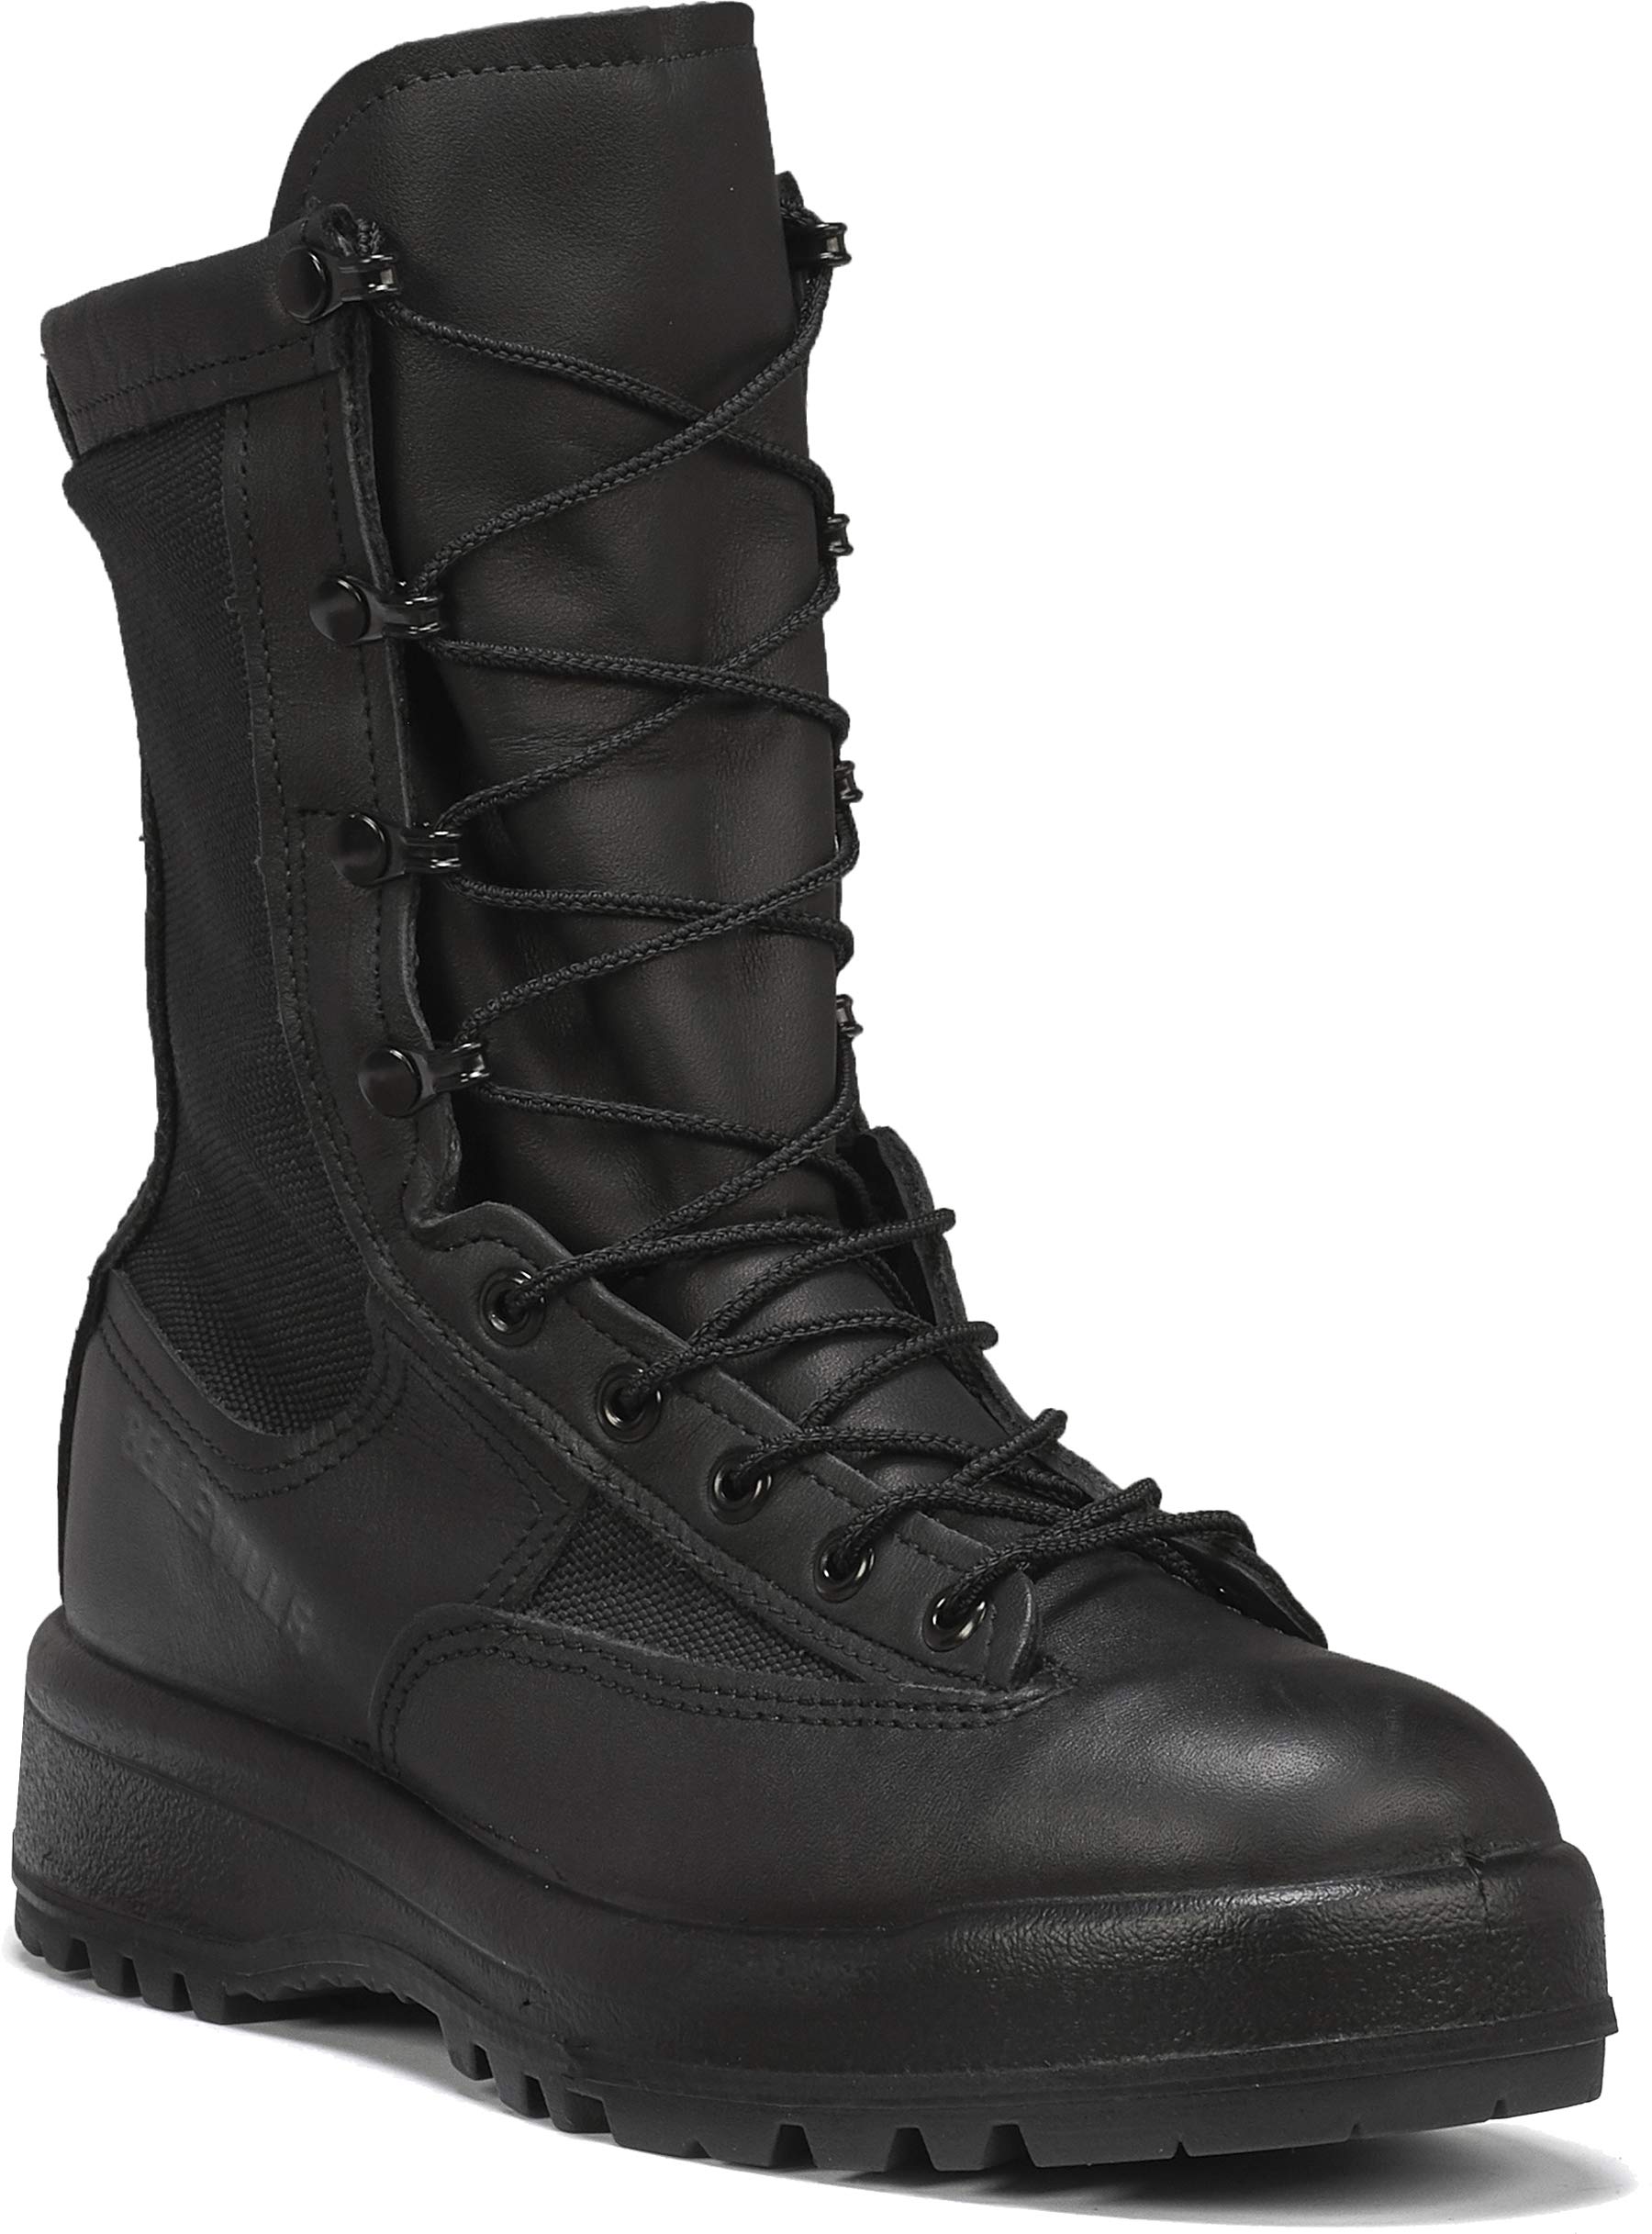 Belleville 700 8 Inch Waterproof Duty Black Tactical Boots for Men - Polishable Leather and Nylon with Oil-Resistant Gore-Tex Lining for Police, EMS, and Security Personnel